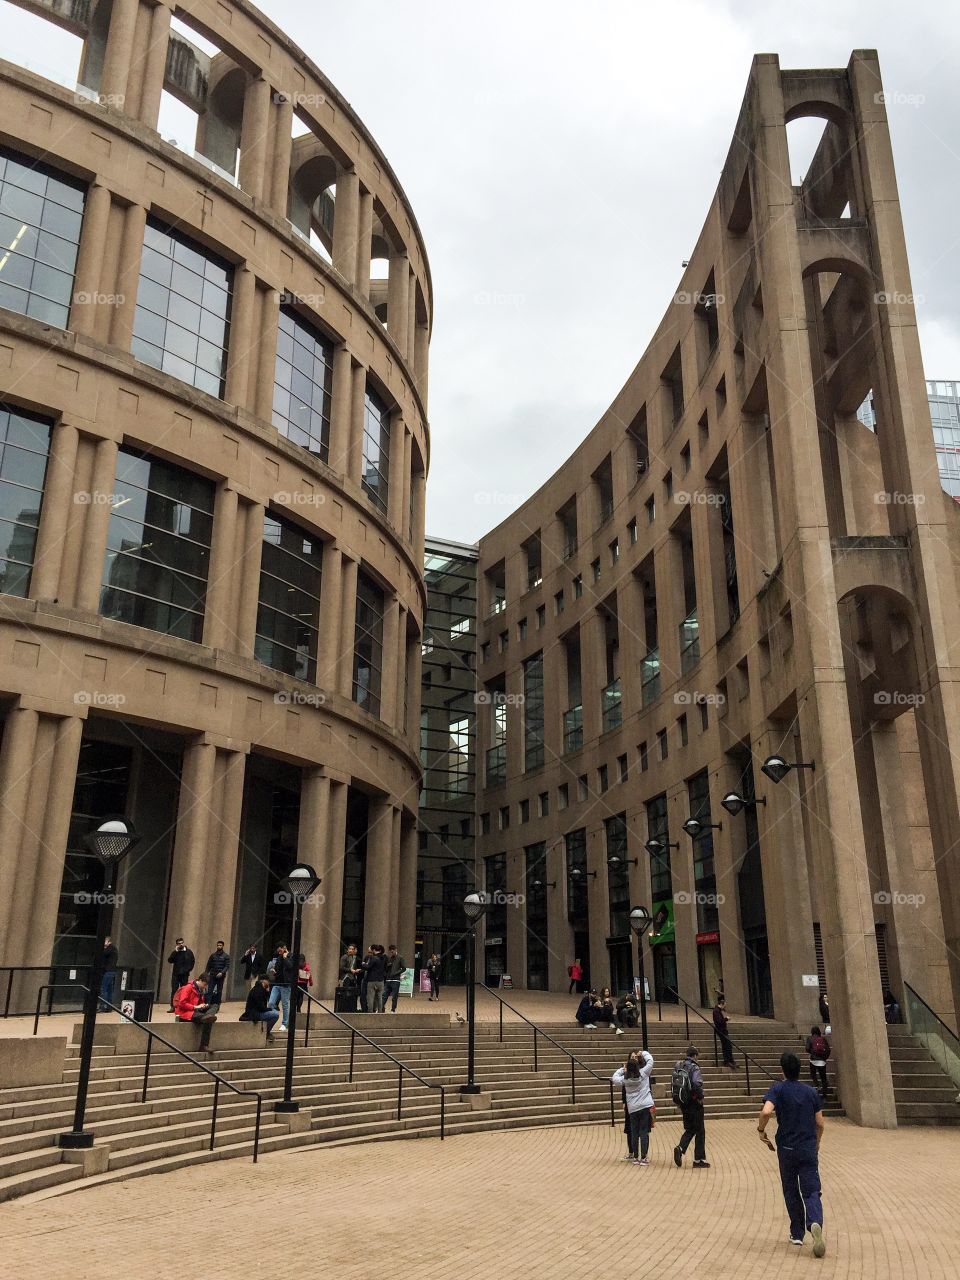 Vancouver Public Library downtown on a cloudy day in Vancouver, BC